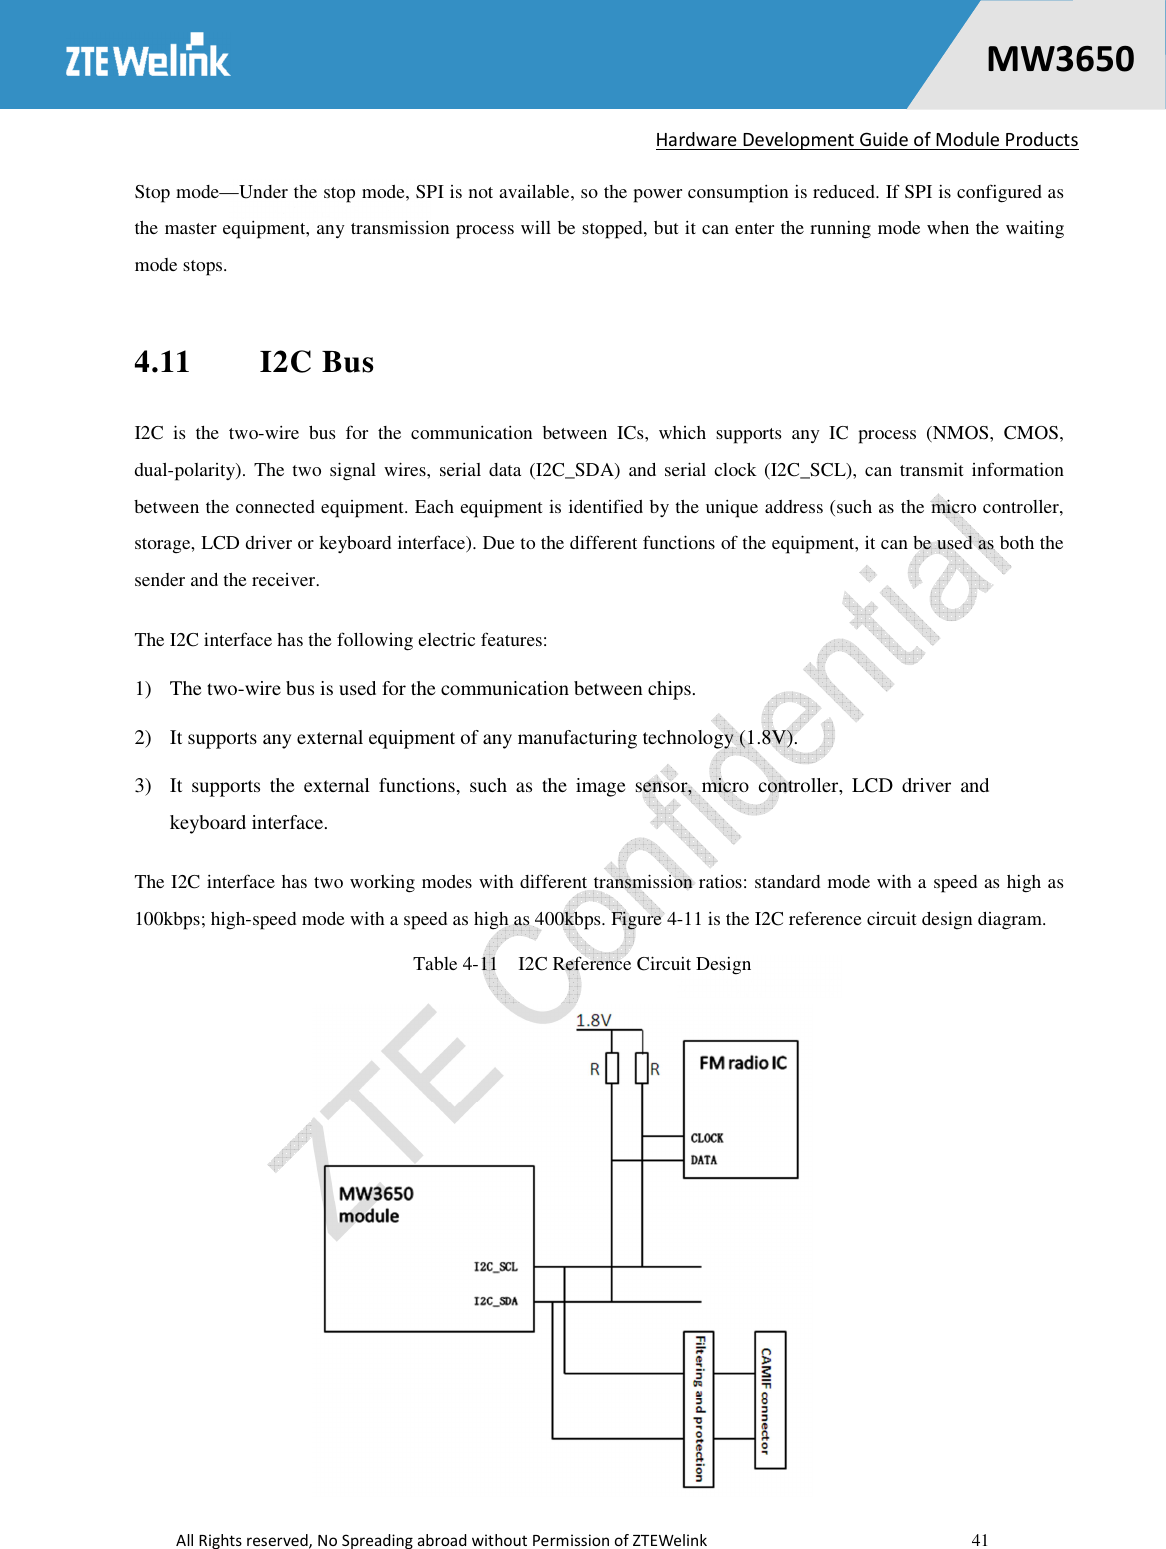   Hardware Development Guide of Module Products  All Rights reserved, No Spreading abroad without Permission of ZTEWelink    41    MW36500 Stop mode—Under the stop mode, SPI is not available, so the power consumption is reduced. If SPI is configured as the master equipment, any transmission process will be stopped, but it can enter the running mode when the waiting mode stops.   4.11  I2C Bus I2C  is  the  two-wire  bus  for  the  communication  between  ICs,  which  supports  any  IC  process  (NMOS,  CMOS, dual-polarity). The two signal wires,  serial  data (I2C_SDA)  and serial  clock (I2C_SCL),  can transmit  information between the connected equipment. Each equipment is identified by the unique address (such as the micro controller, storage, LCD driver or keyboard interface). Due to the different functions of the equipment, it can be used as both the sender and the receiver. The I2C interface has the following electric features:   1) The two-wire bus is used for the communication between chips.   2) It supports any external equipment of any manufacturing technology (1.8V).   3) It  supports  the  external  functions,  such  as  the  image  sensor,  micro  controller,  LCD  driver  and keyboard interface.   The I2C interface has two working modes with different transmission ratios: standard mode with a speed as high as 100kbps; high-speed mode with a speed as high as 400kbps. Figure 4-11 is the I2C reference circuit design diagram. Table 4-11    I2C Reference Circuit Design  